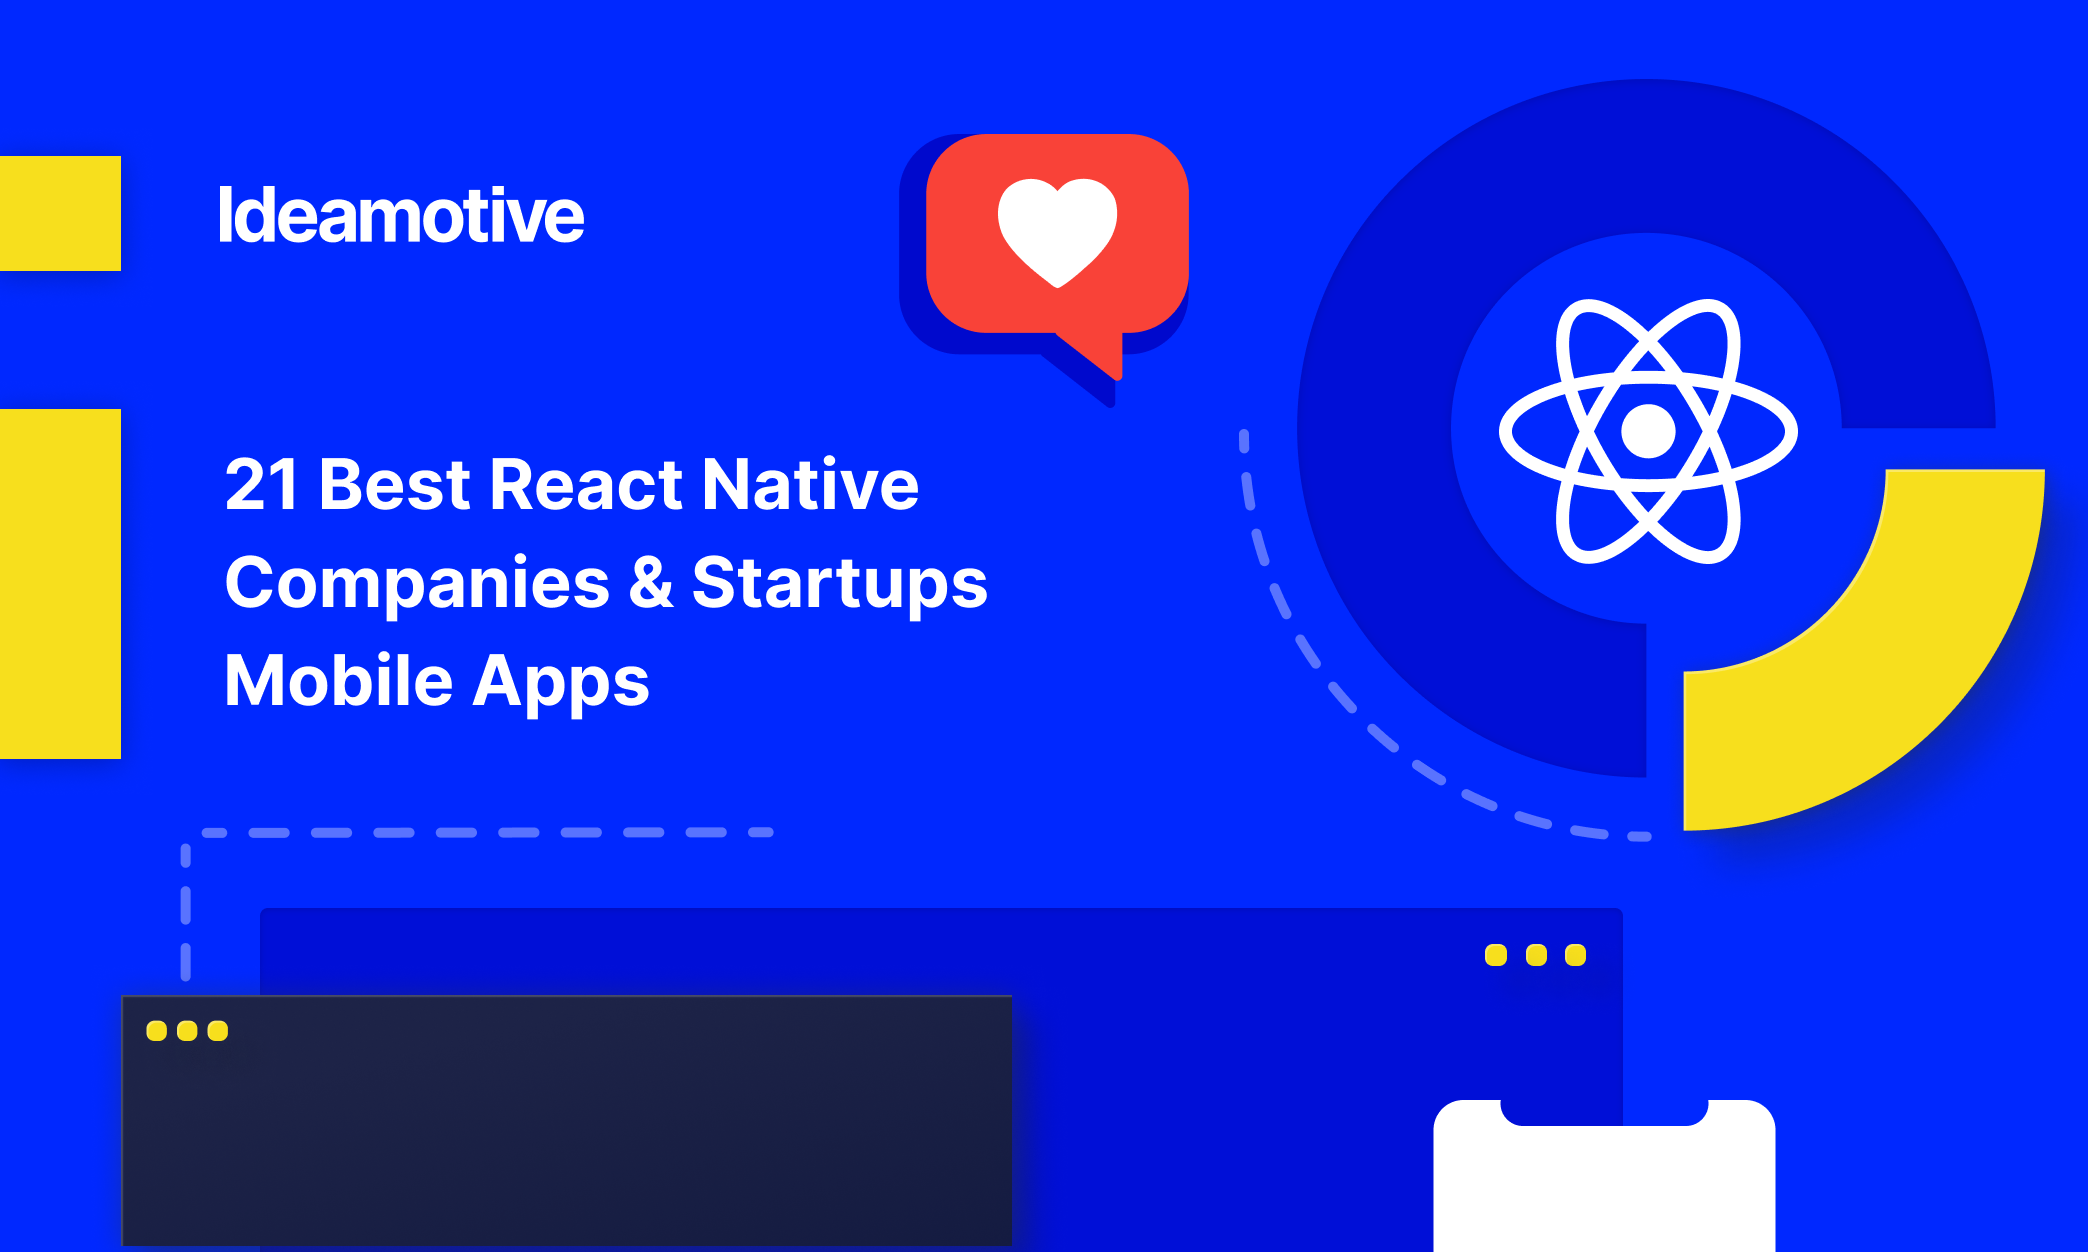 Create a two-player memory game with React Native